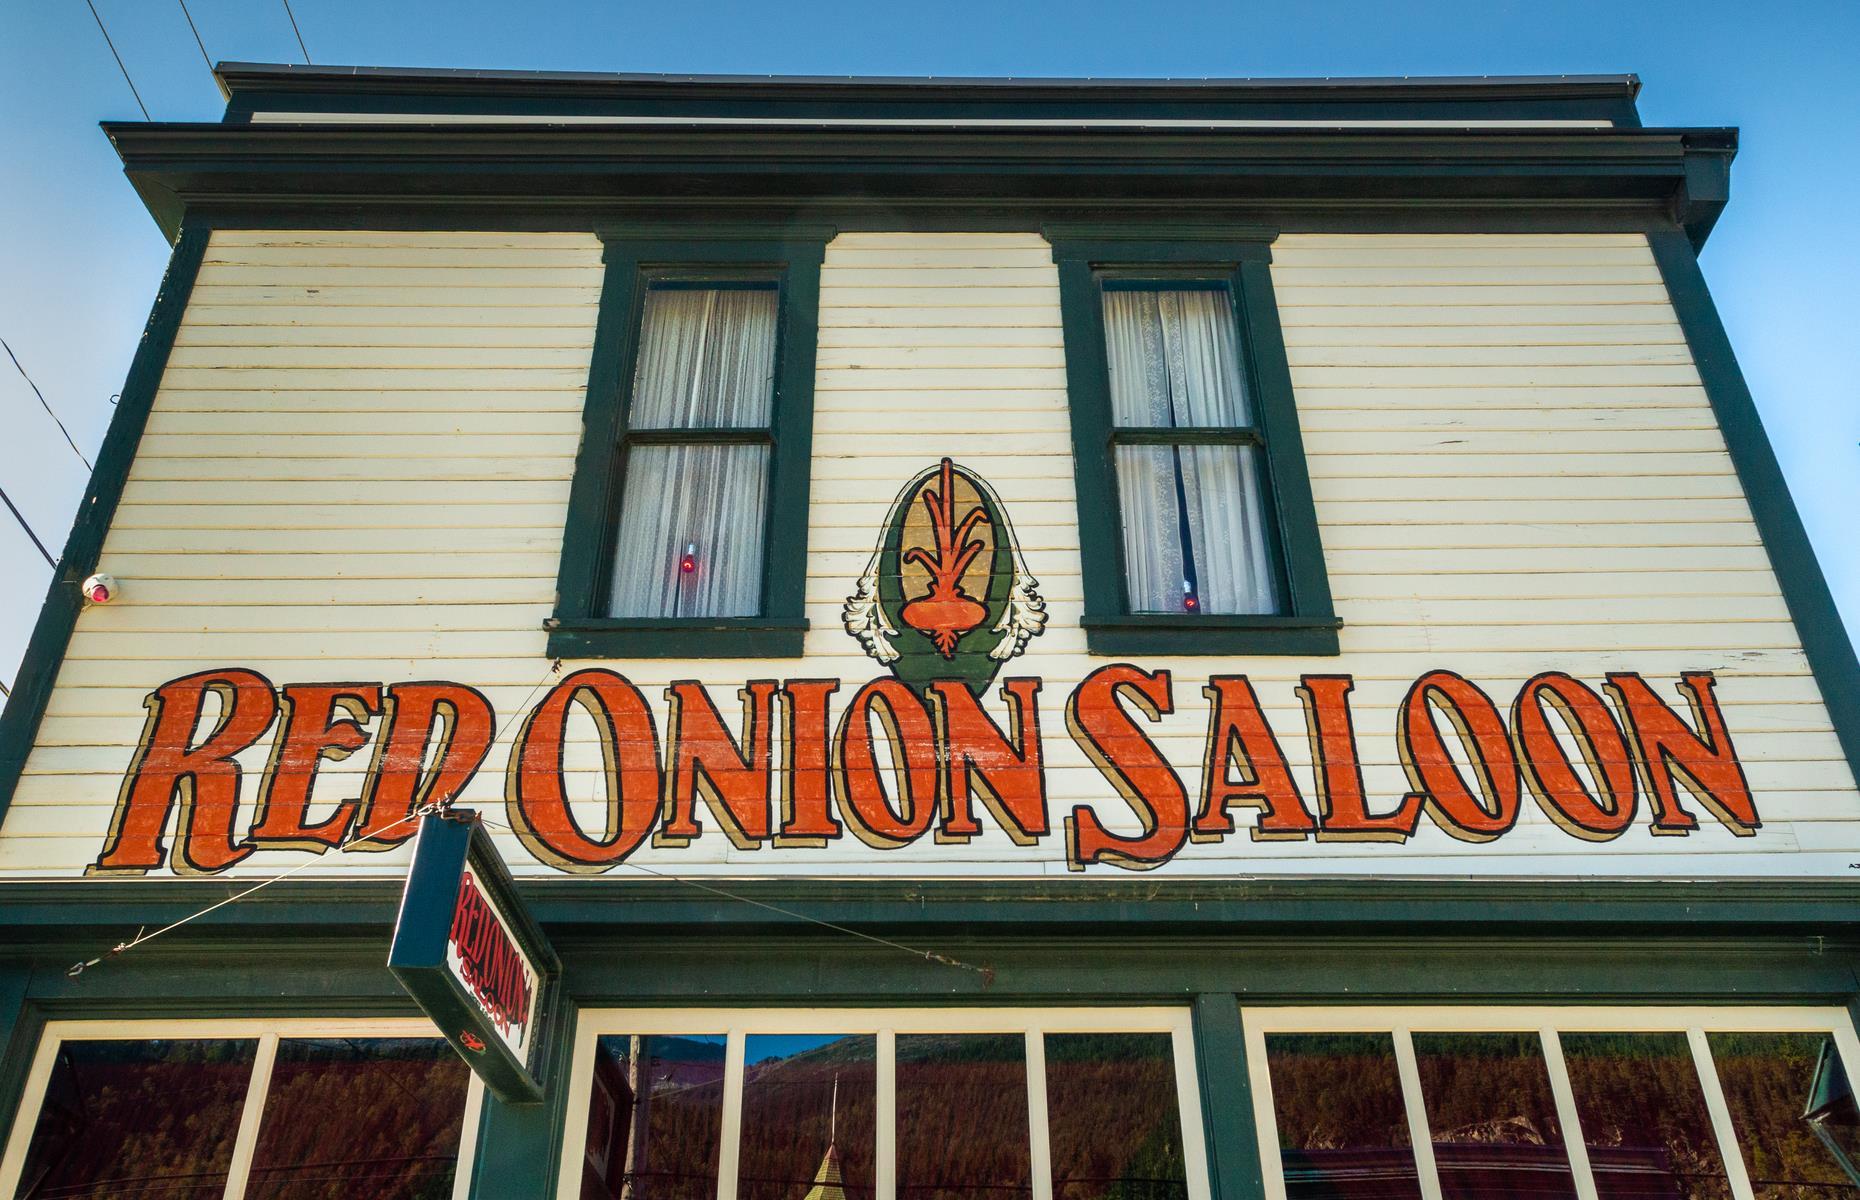 <p>Swing by <a href="https://www.redonion1898.com/">Red Onion Saloon</a> for a drink and a bite to eat and you might get more than you bargained for. The classic Gold Rush saloon dates back to the 19th century and once also served as a bordello – there's even a Brothel Museum above the main bar. It's said that the ghost of one of the brothel workers, Lydia, still haunts the place today.</p>  <p><a href="http://bit.ly/3roL4wv"><strong>Love this? Follow our Facebook page for more spooky travel inspiration</strong></a></p>